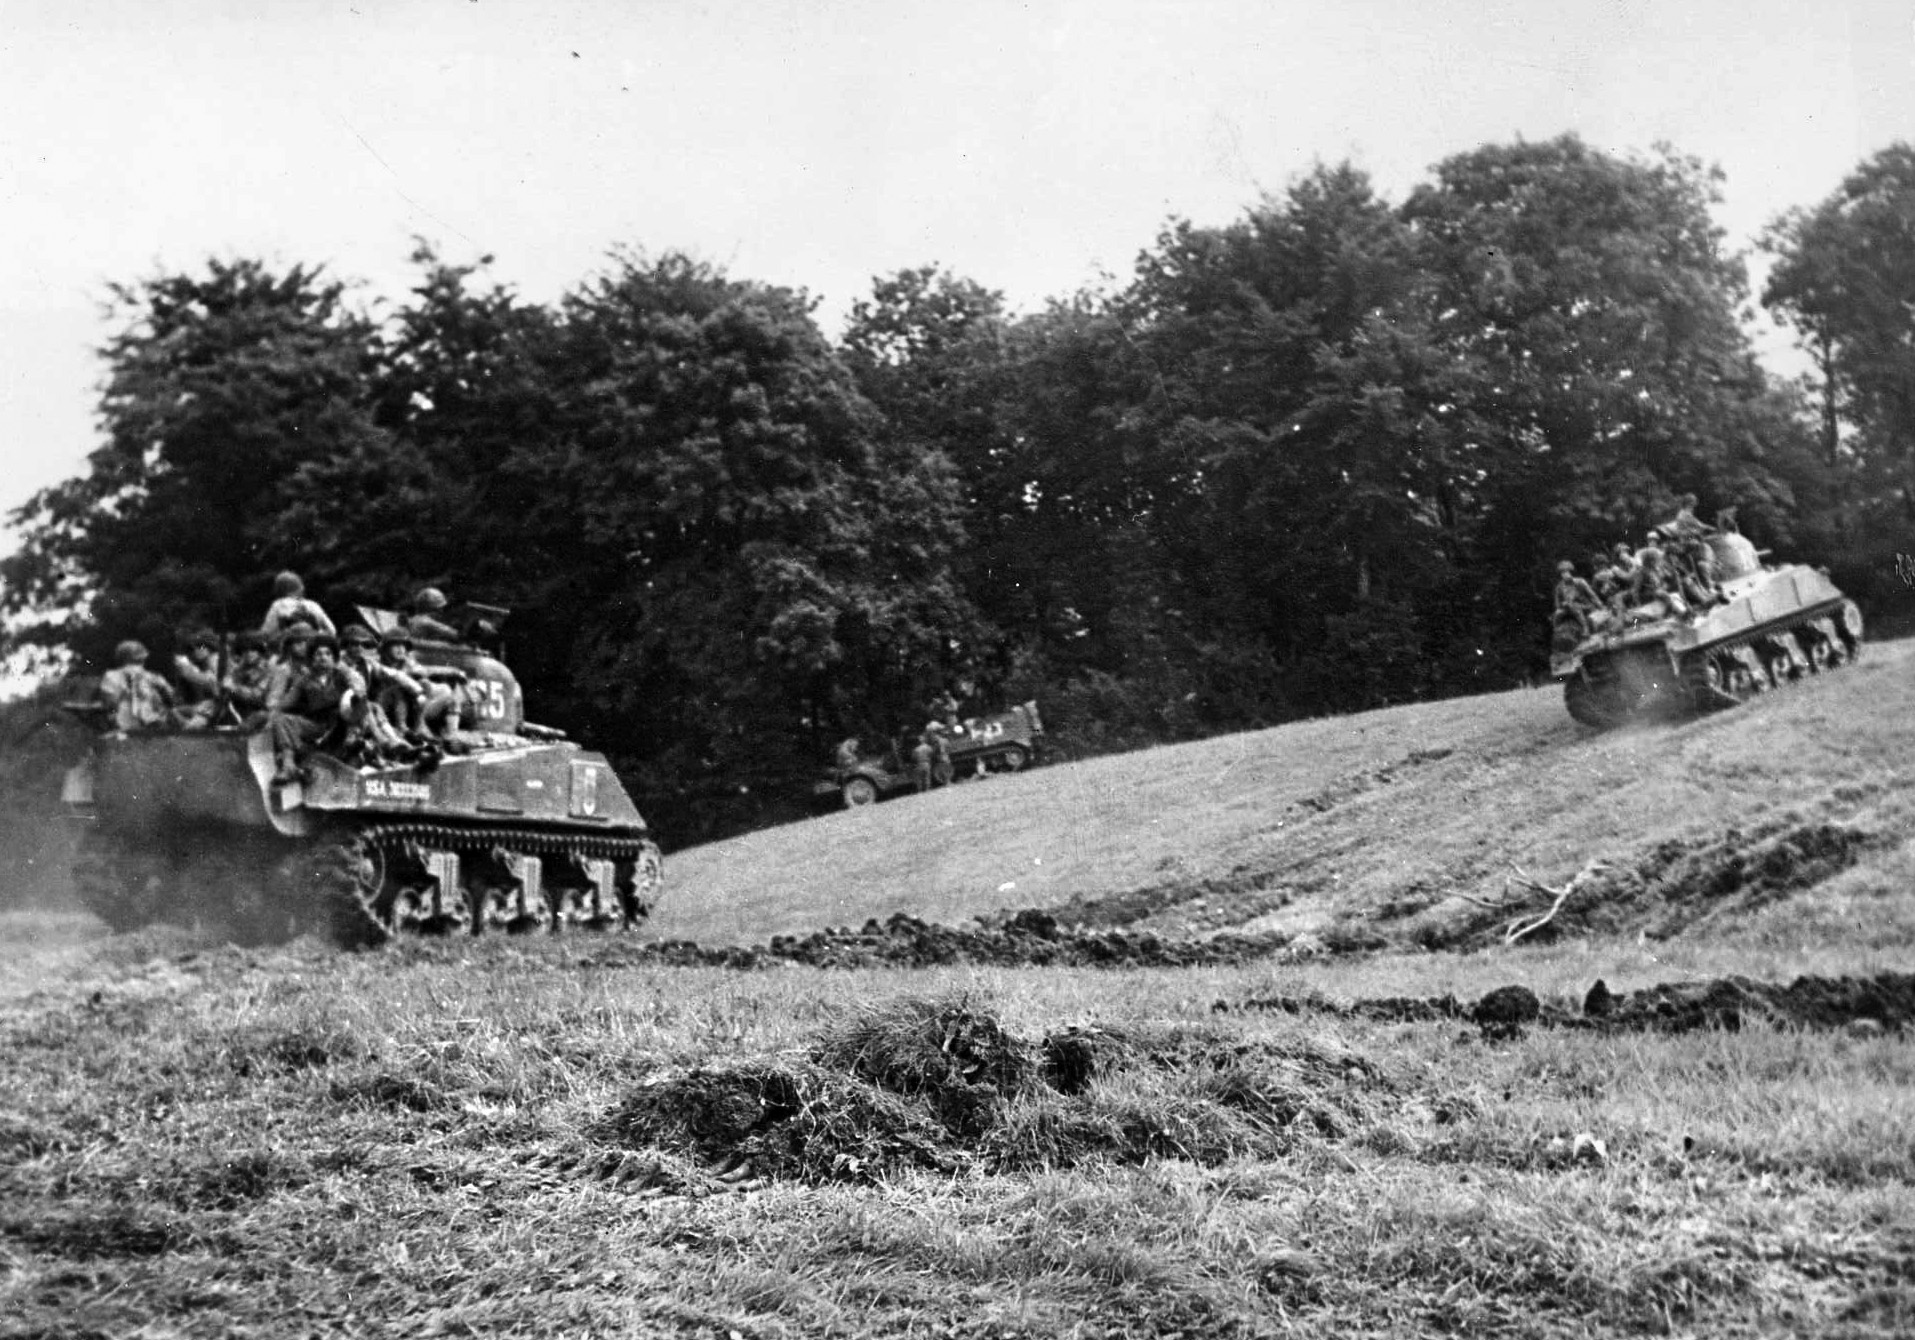 Sherman tanks negotiate a slope in the Norman countryside as American troops hitch a ride toward the front. Coming ashore with the Shermans of the 746th Tank Battalion, the men of the 401st Glider Infantry Regiment rode toward Ste-Mère-Église on the backs of the tanks.